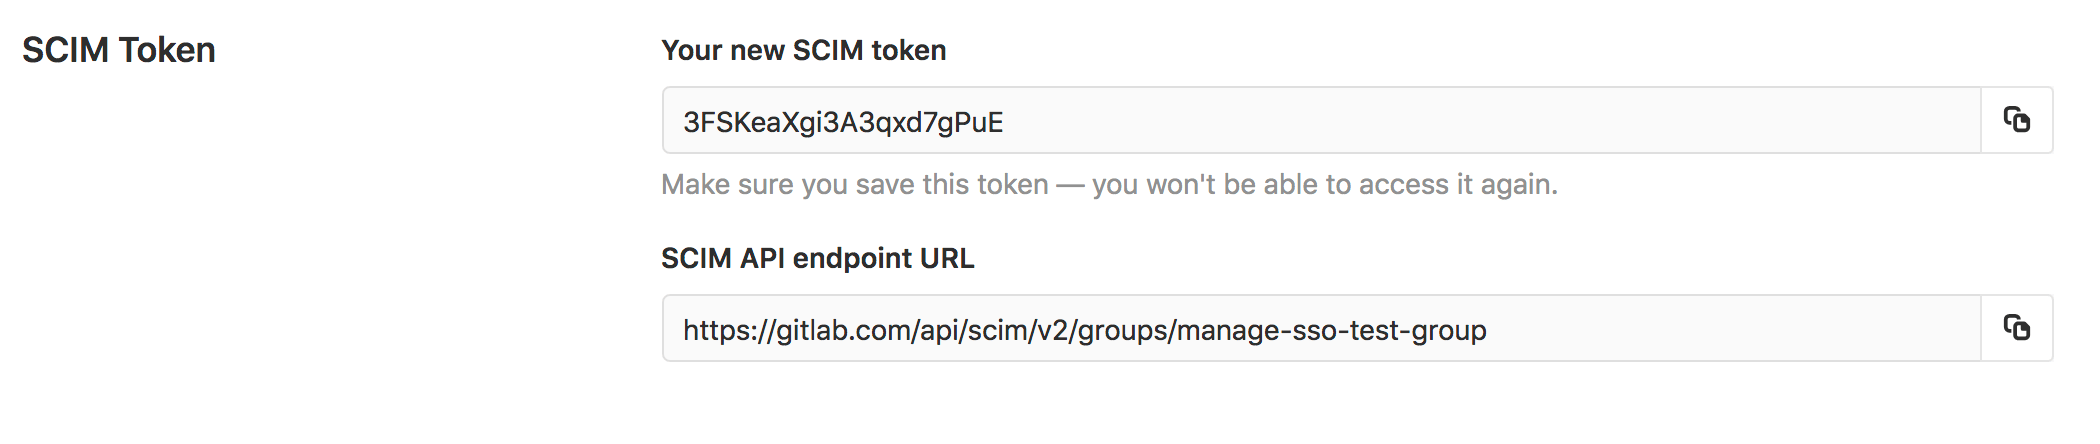 Automatically manage group members on GitLab.com using SCIM